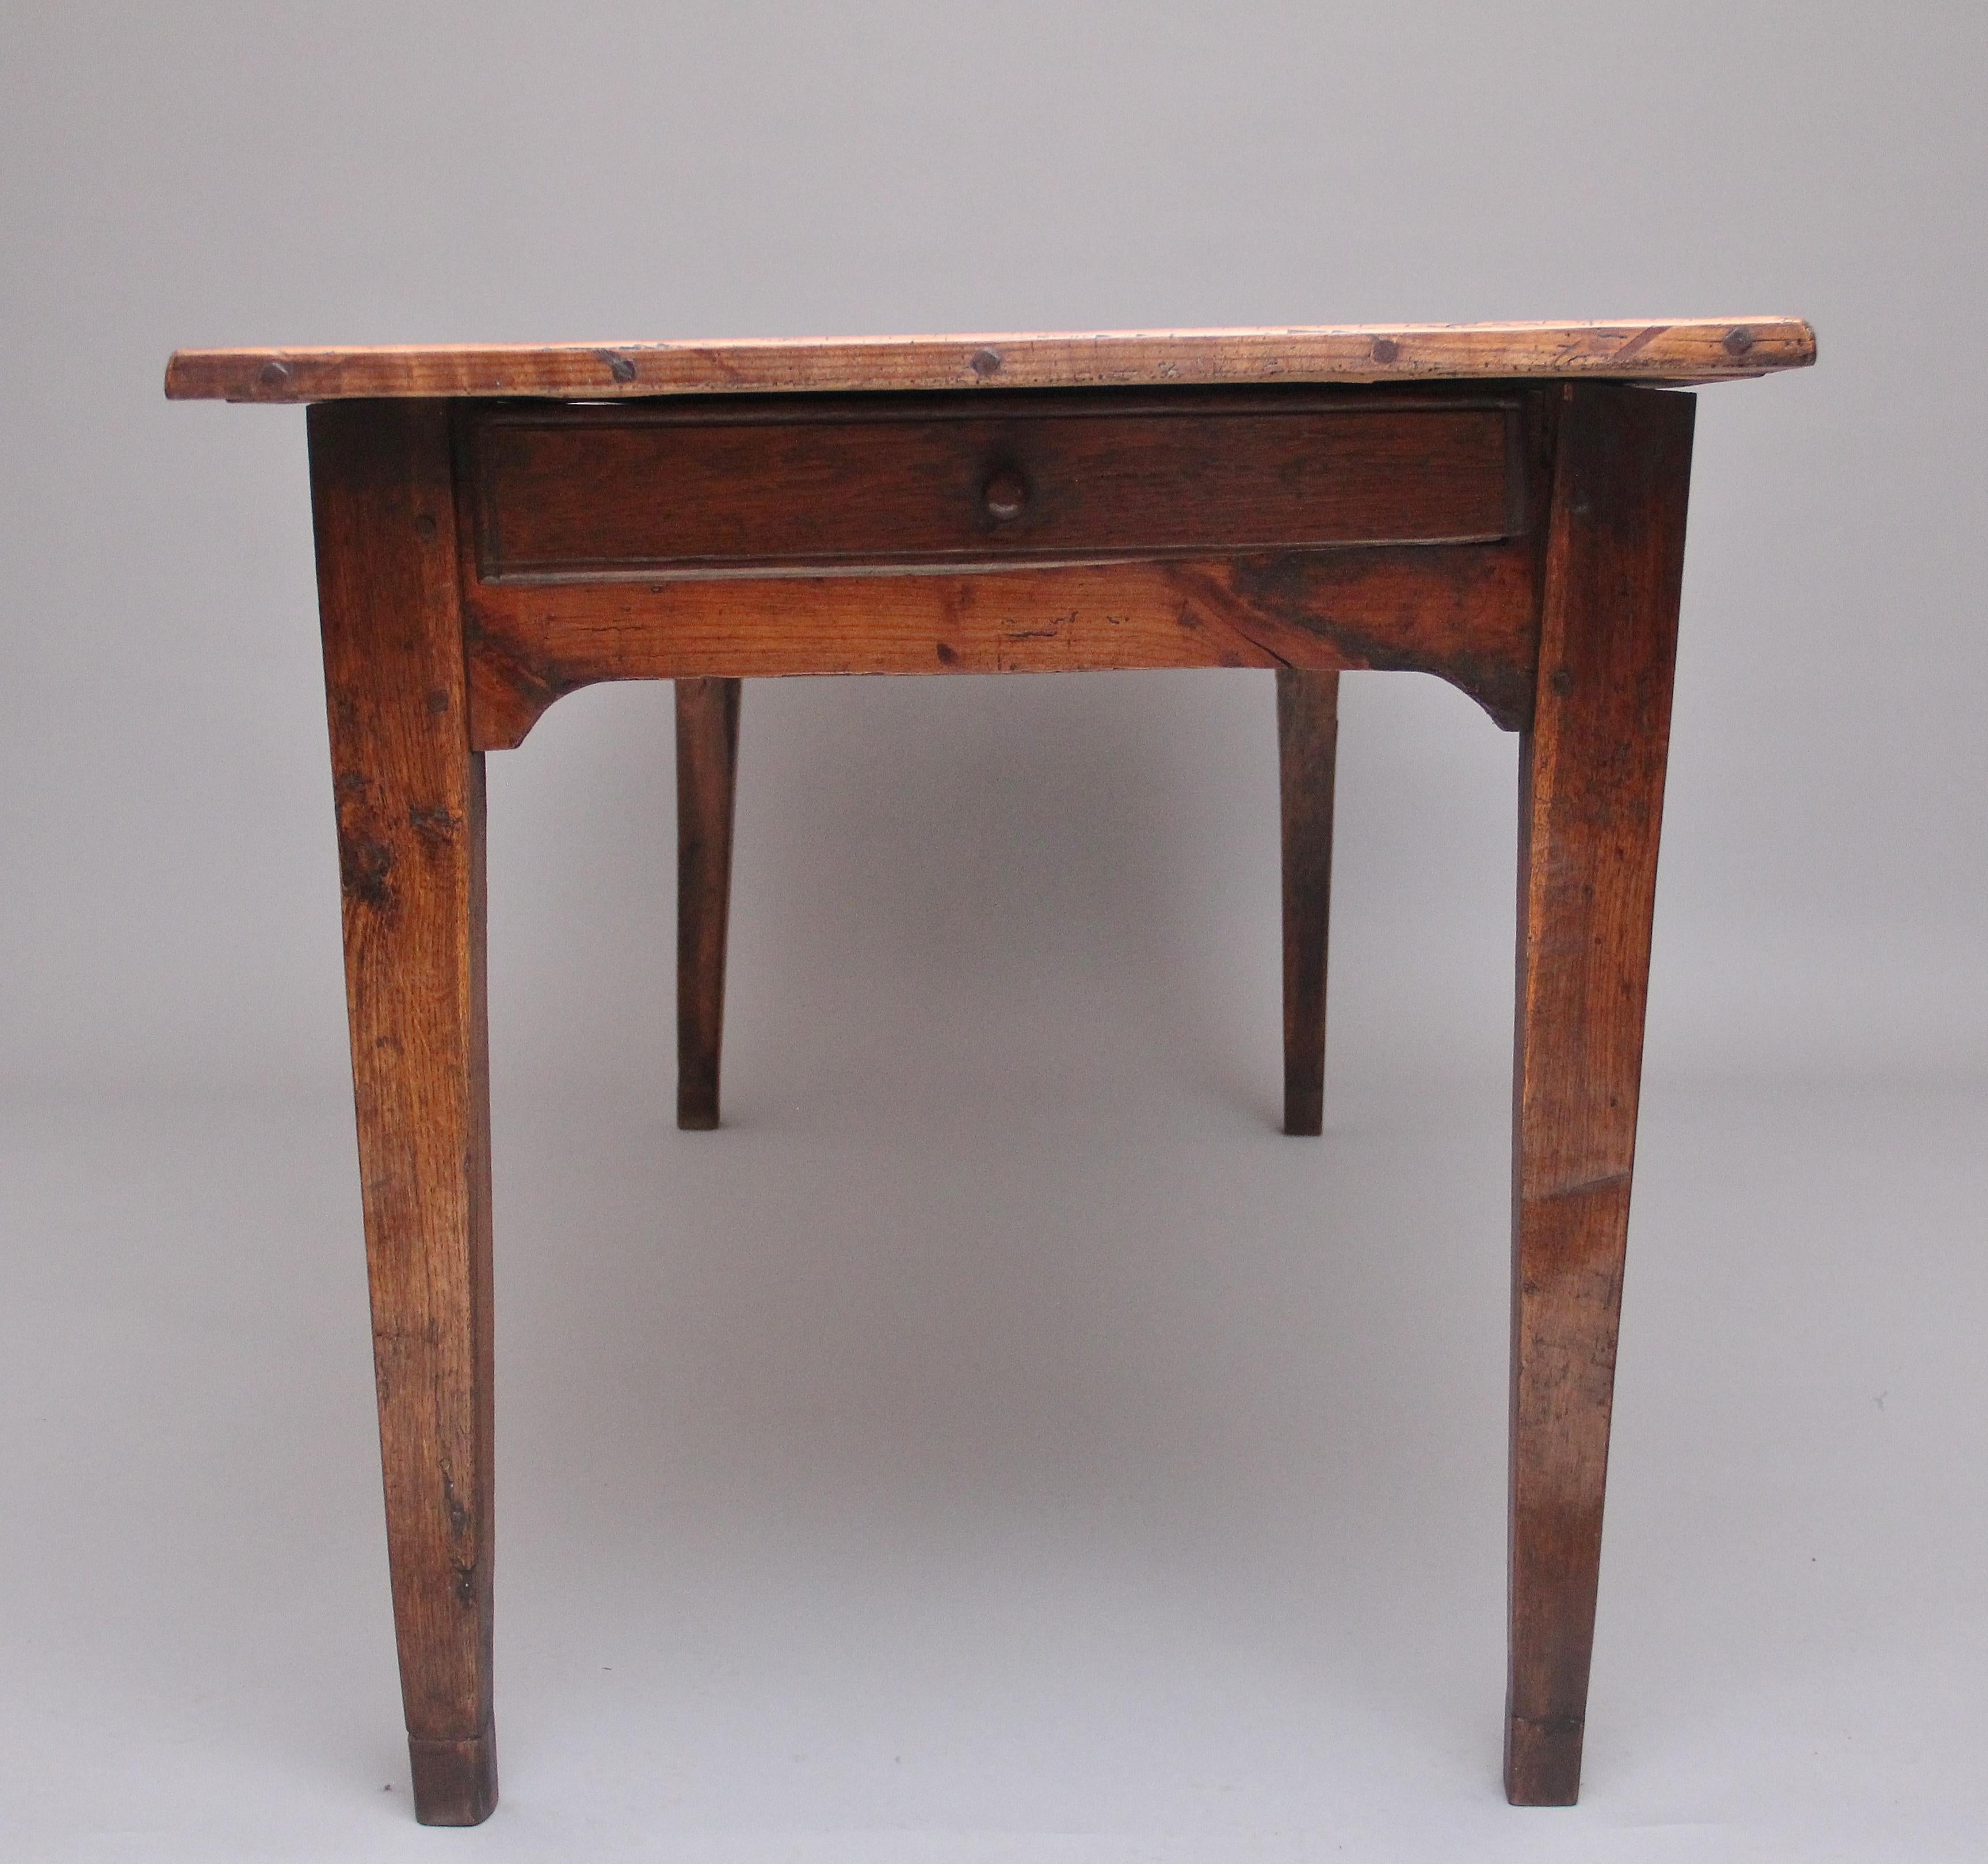 British Early 19th Century Rustic Fruitwood Farmhouse Table